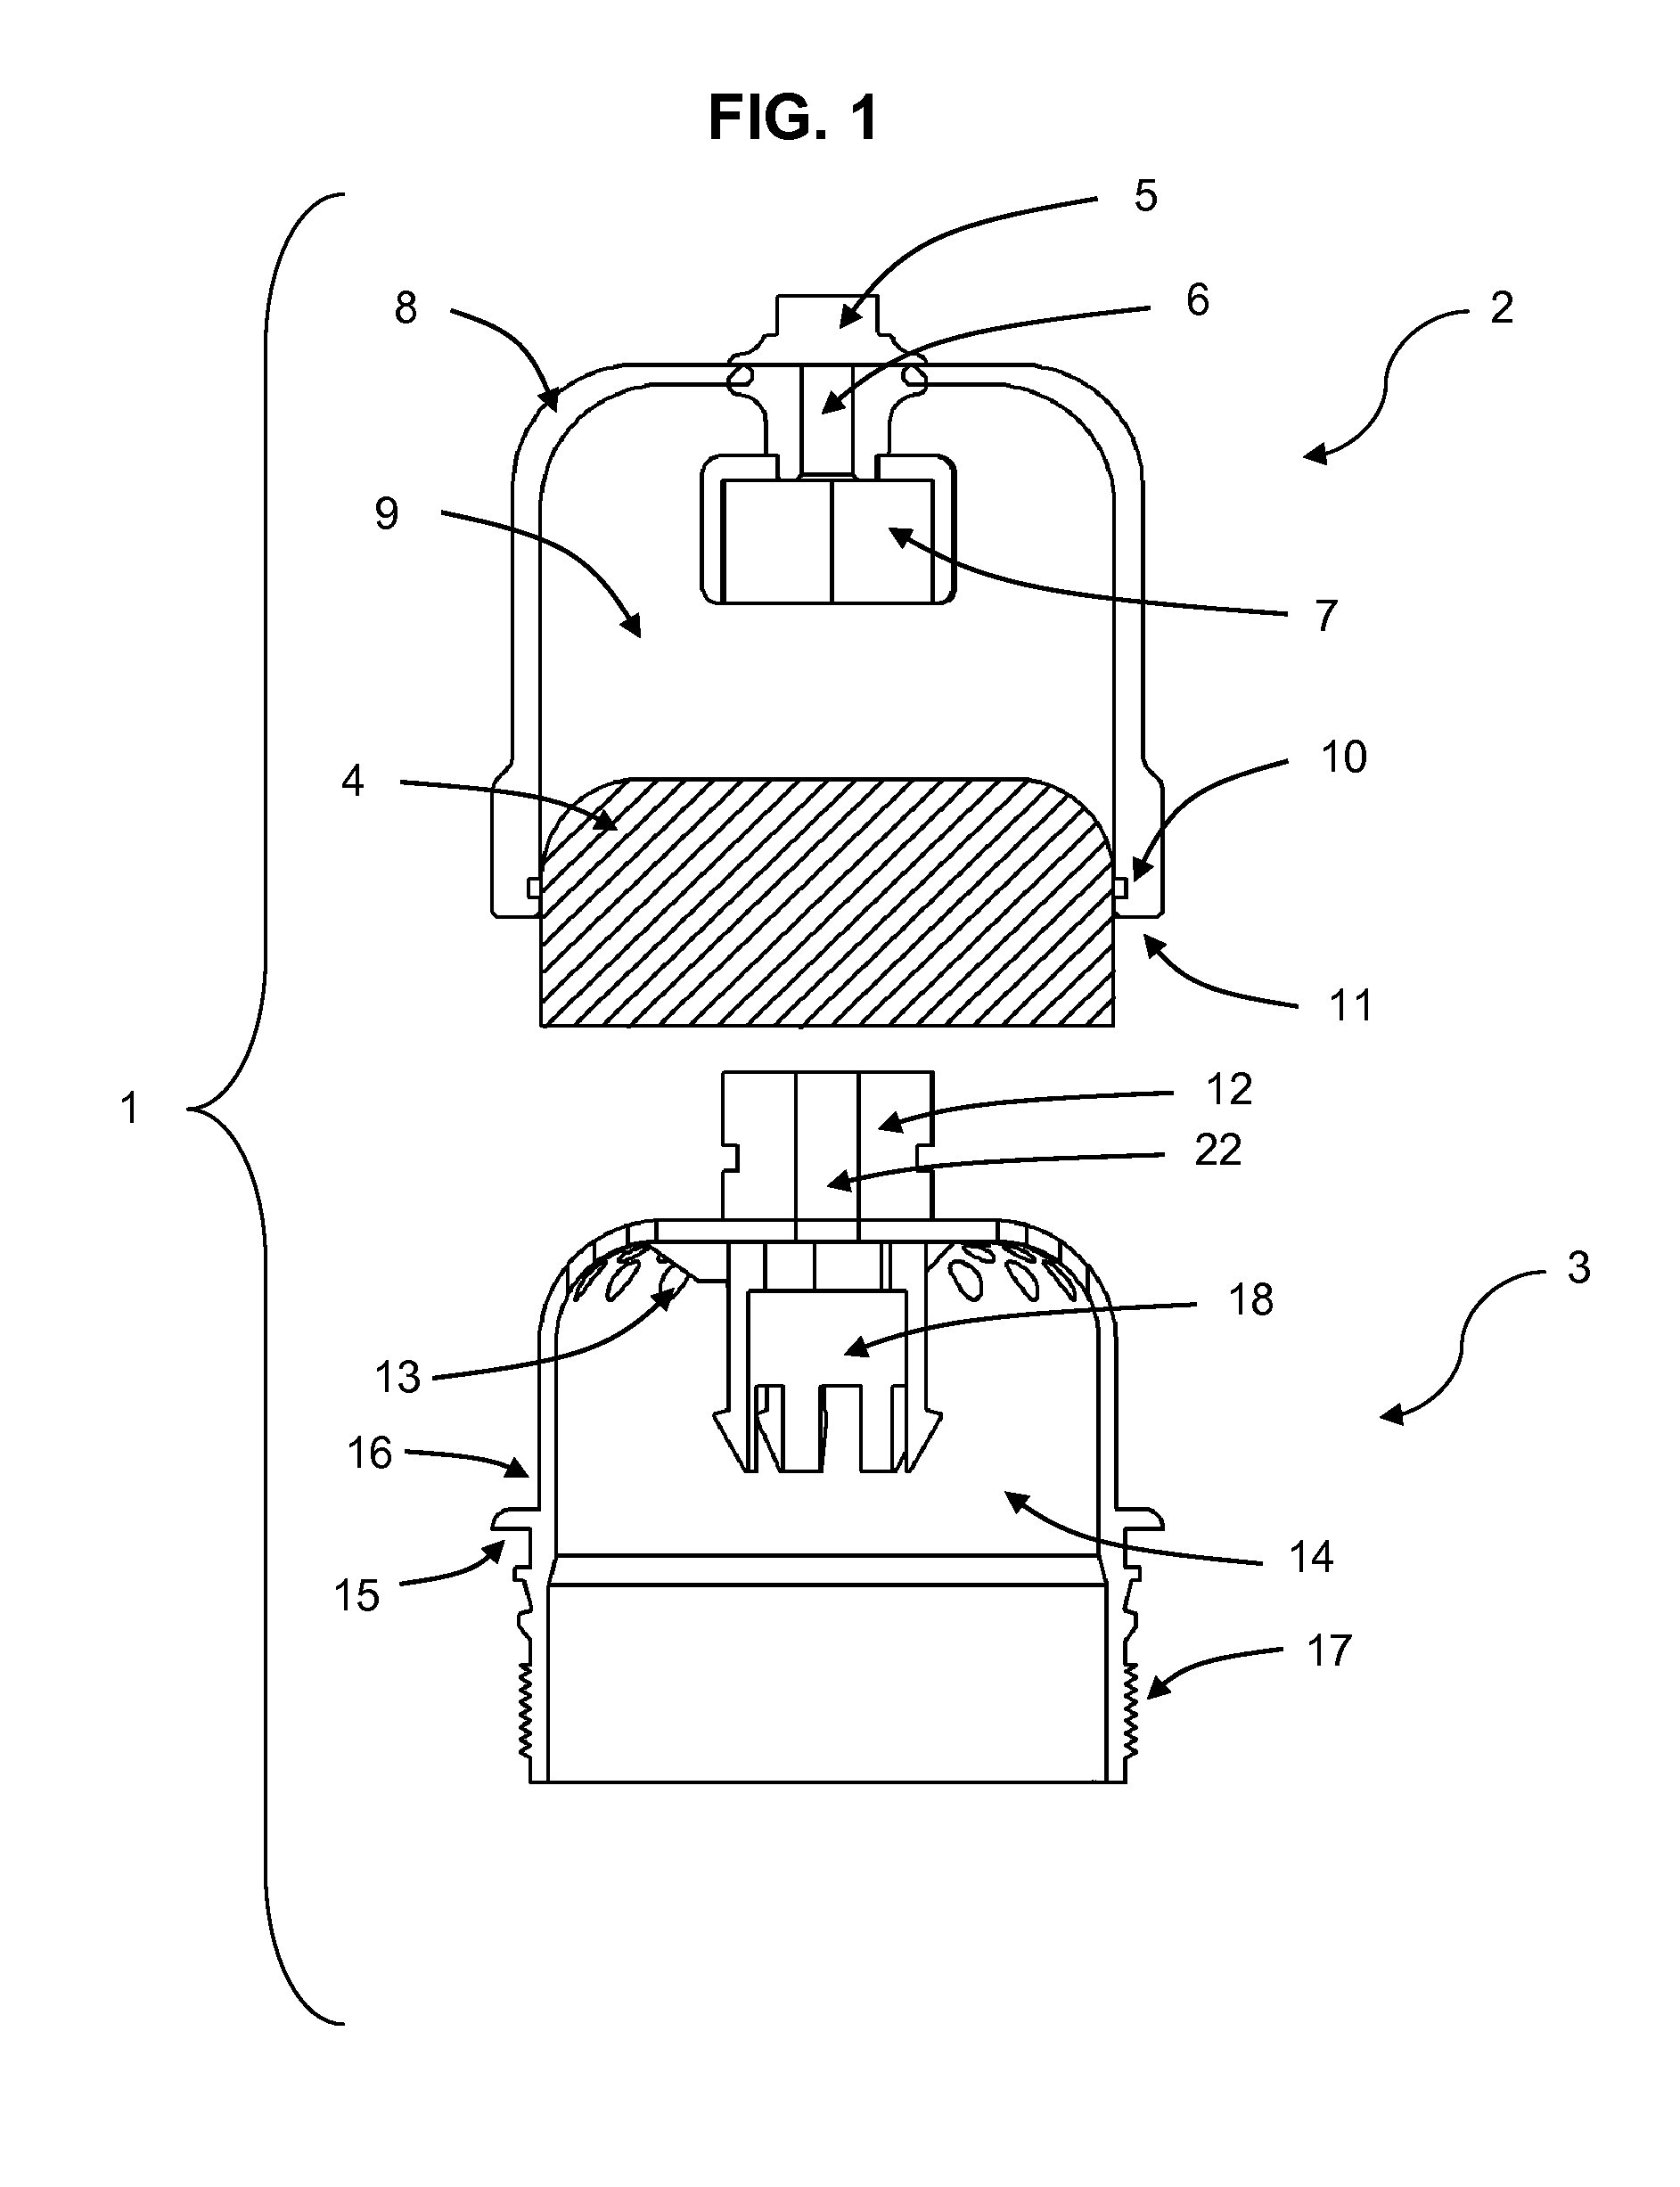 Filter Cap Additive Delivery System